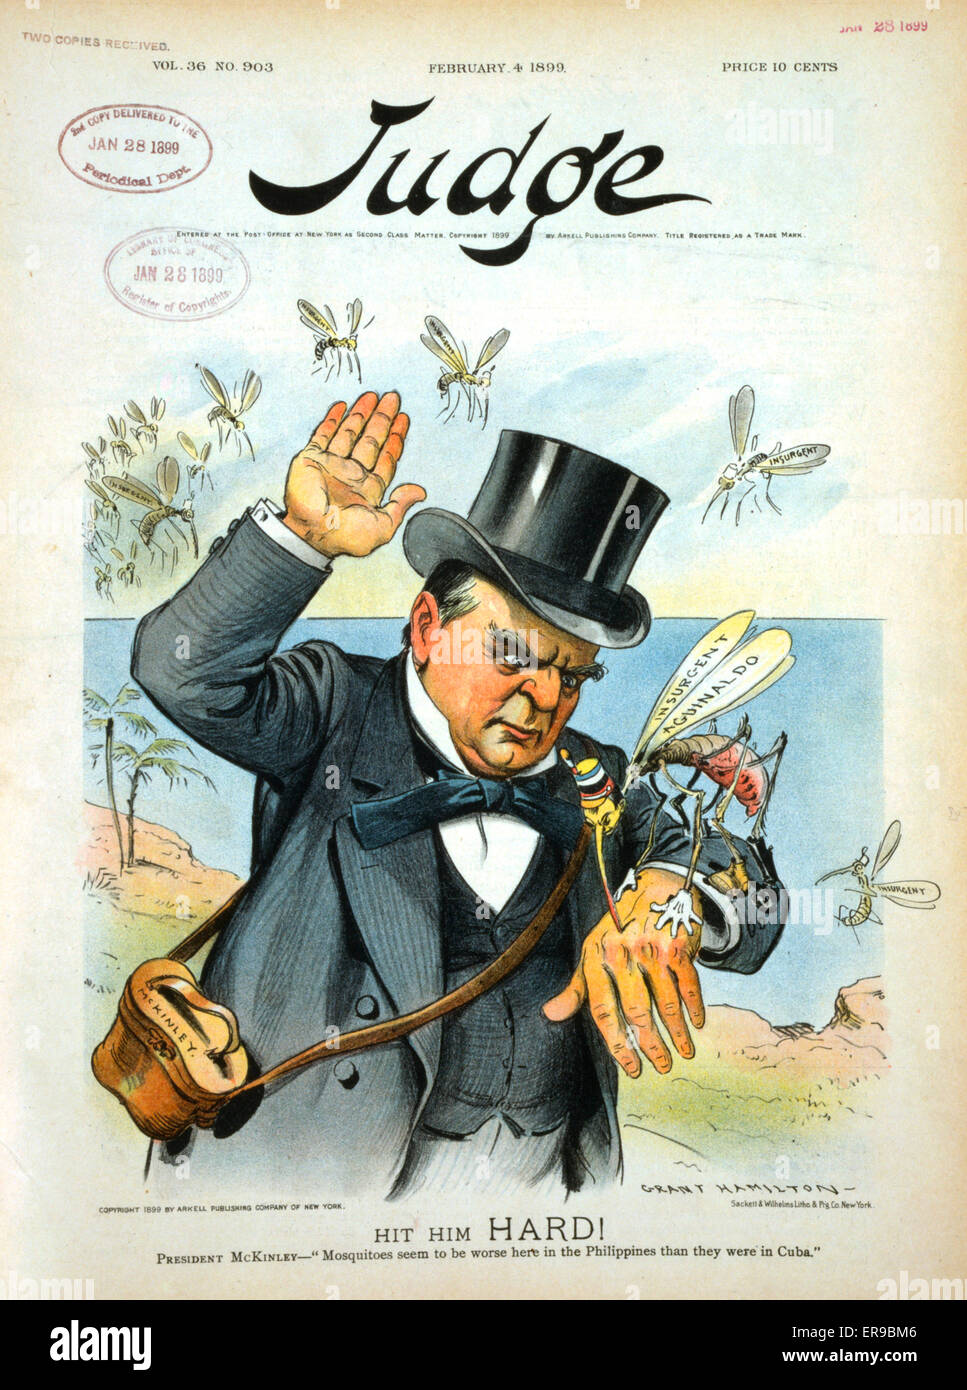 Hit him hard! President McKinley - Mosquitoes seem to be wor Stock Photo